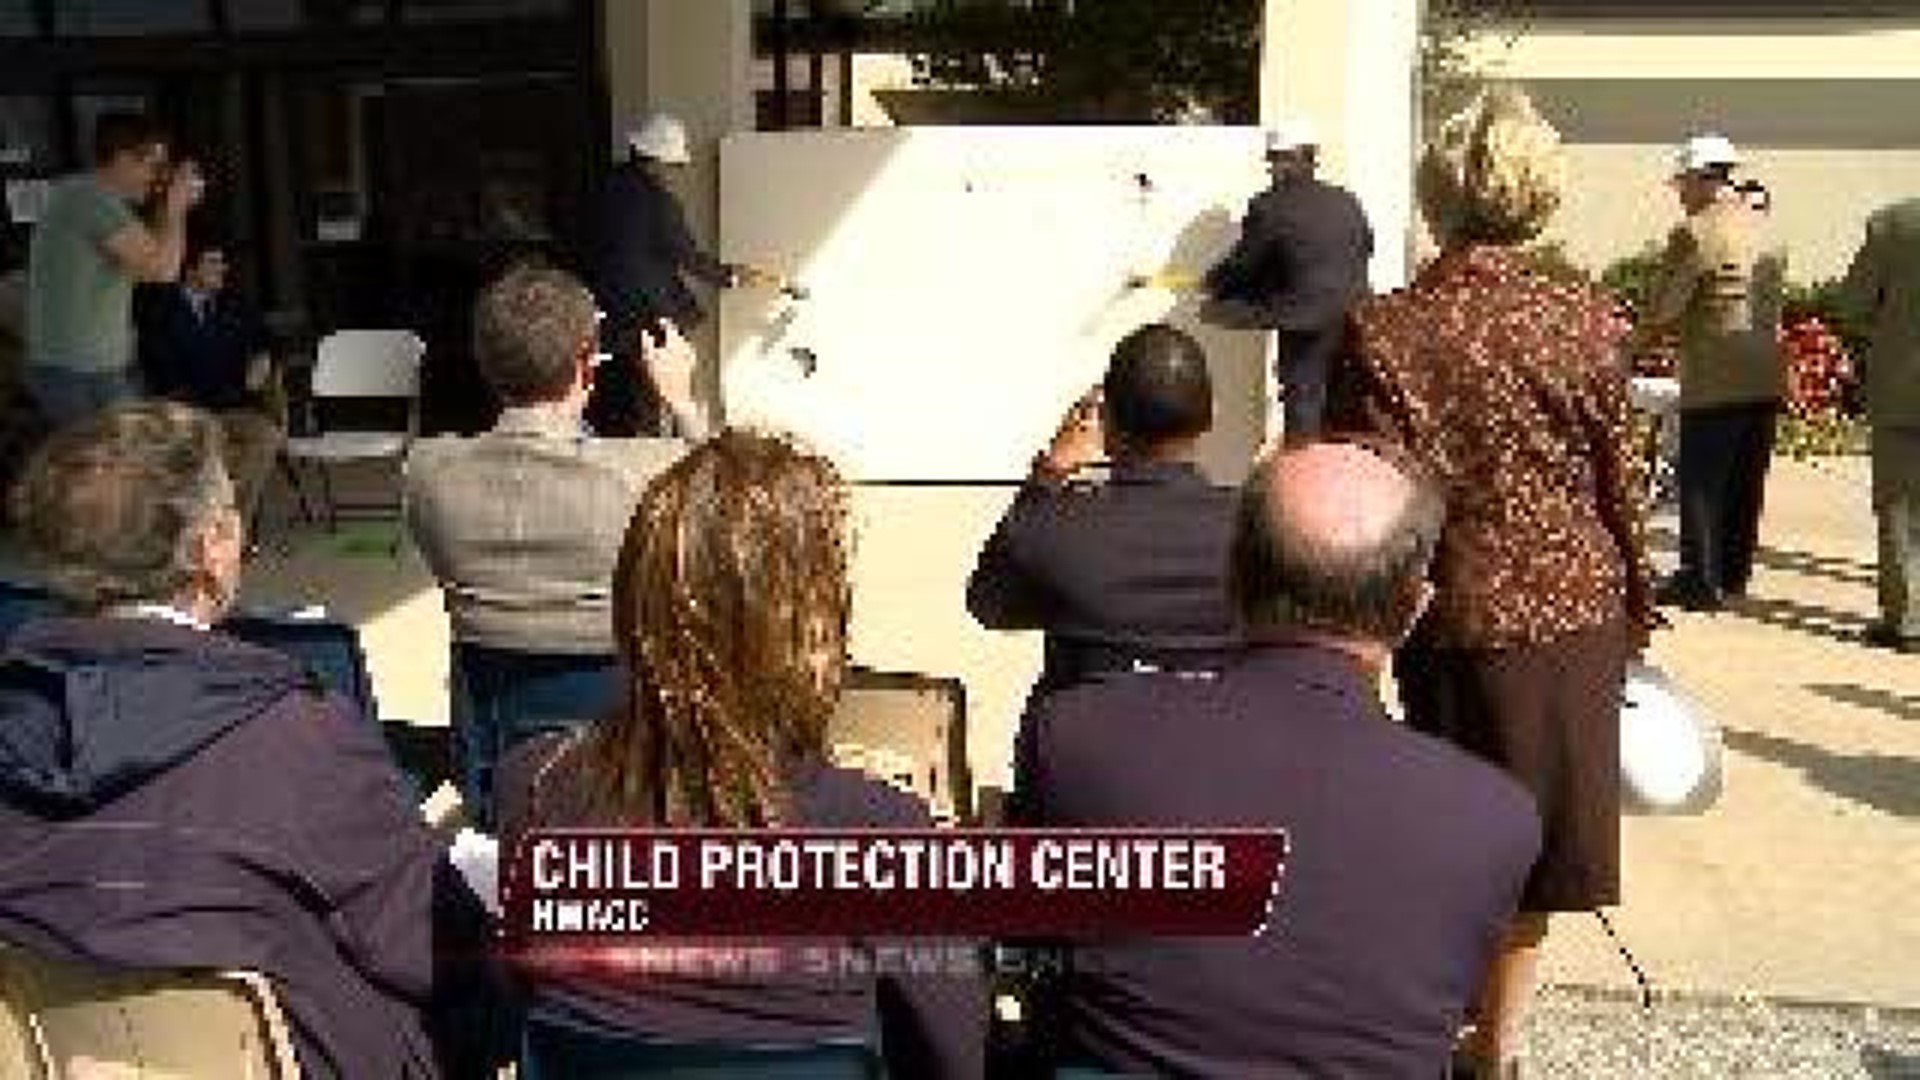 NWACC Breaks Ground on Child Protection Training Center